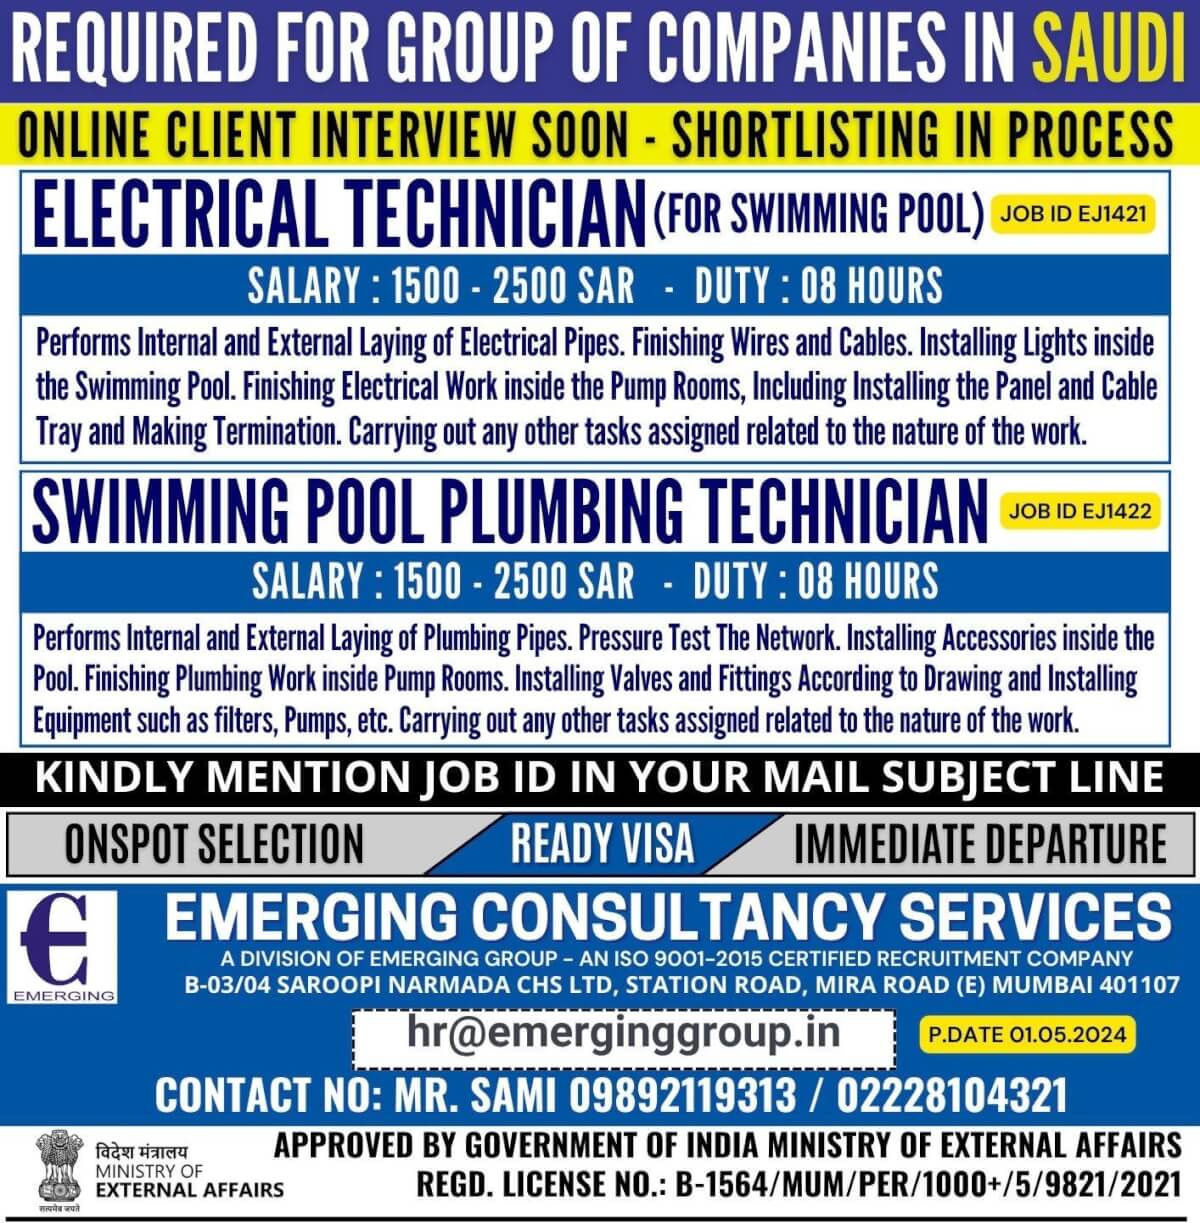 REQUIRED FOR GROUP OF COMPANIES IN SAUDI ARABIA